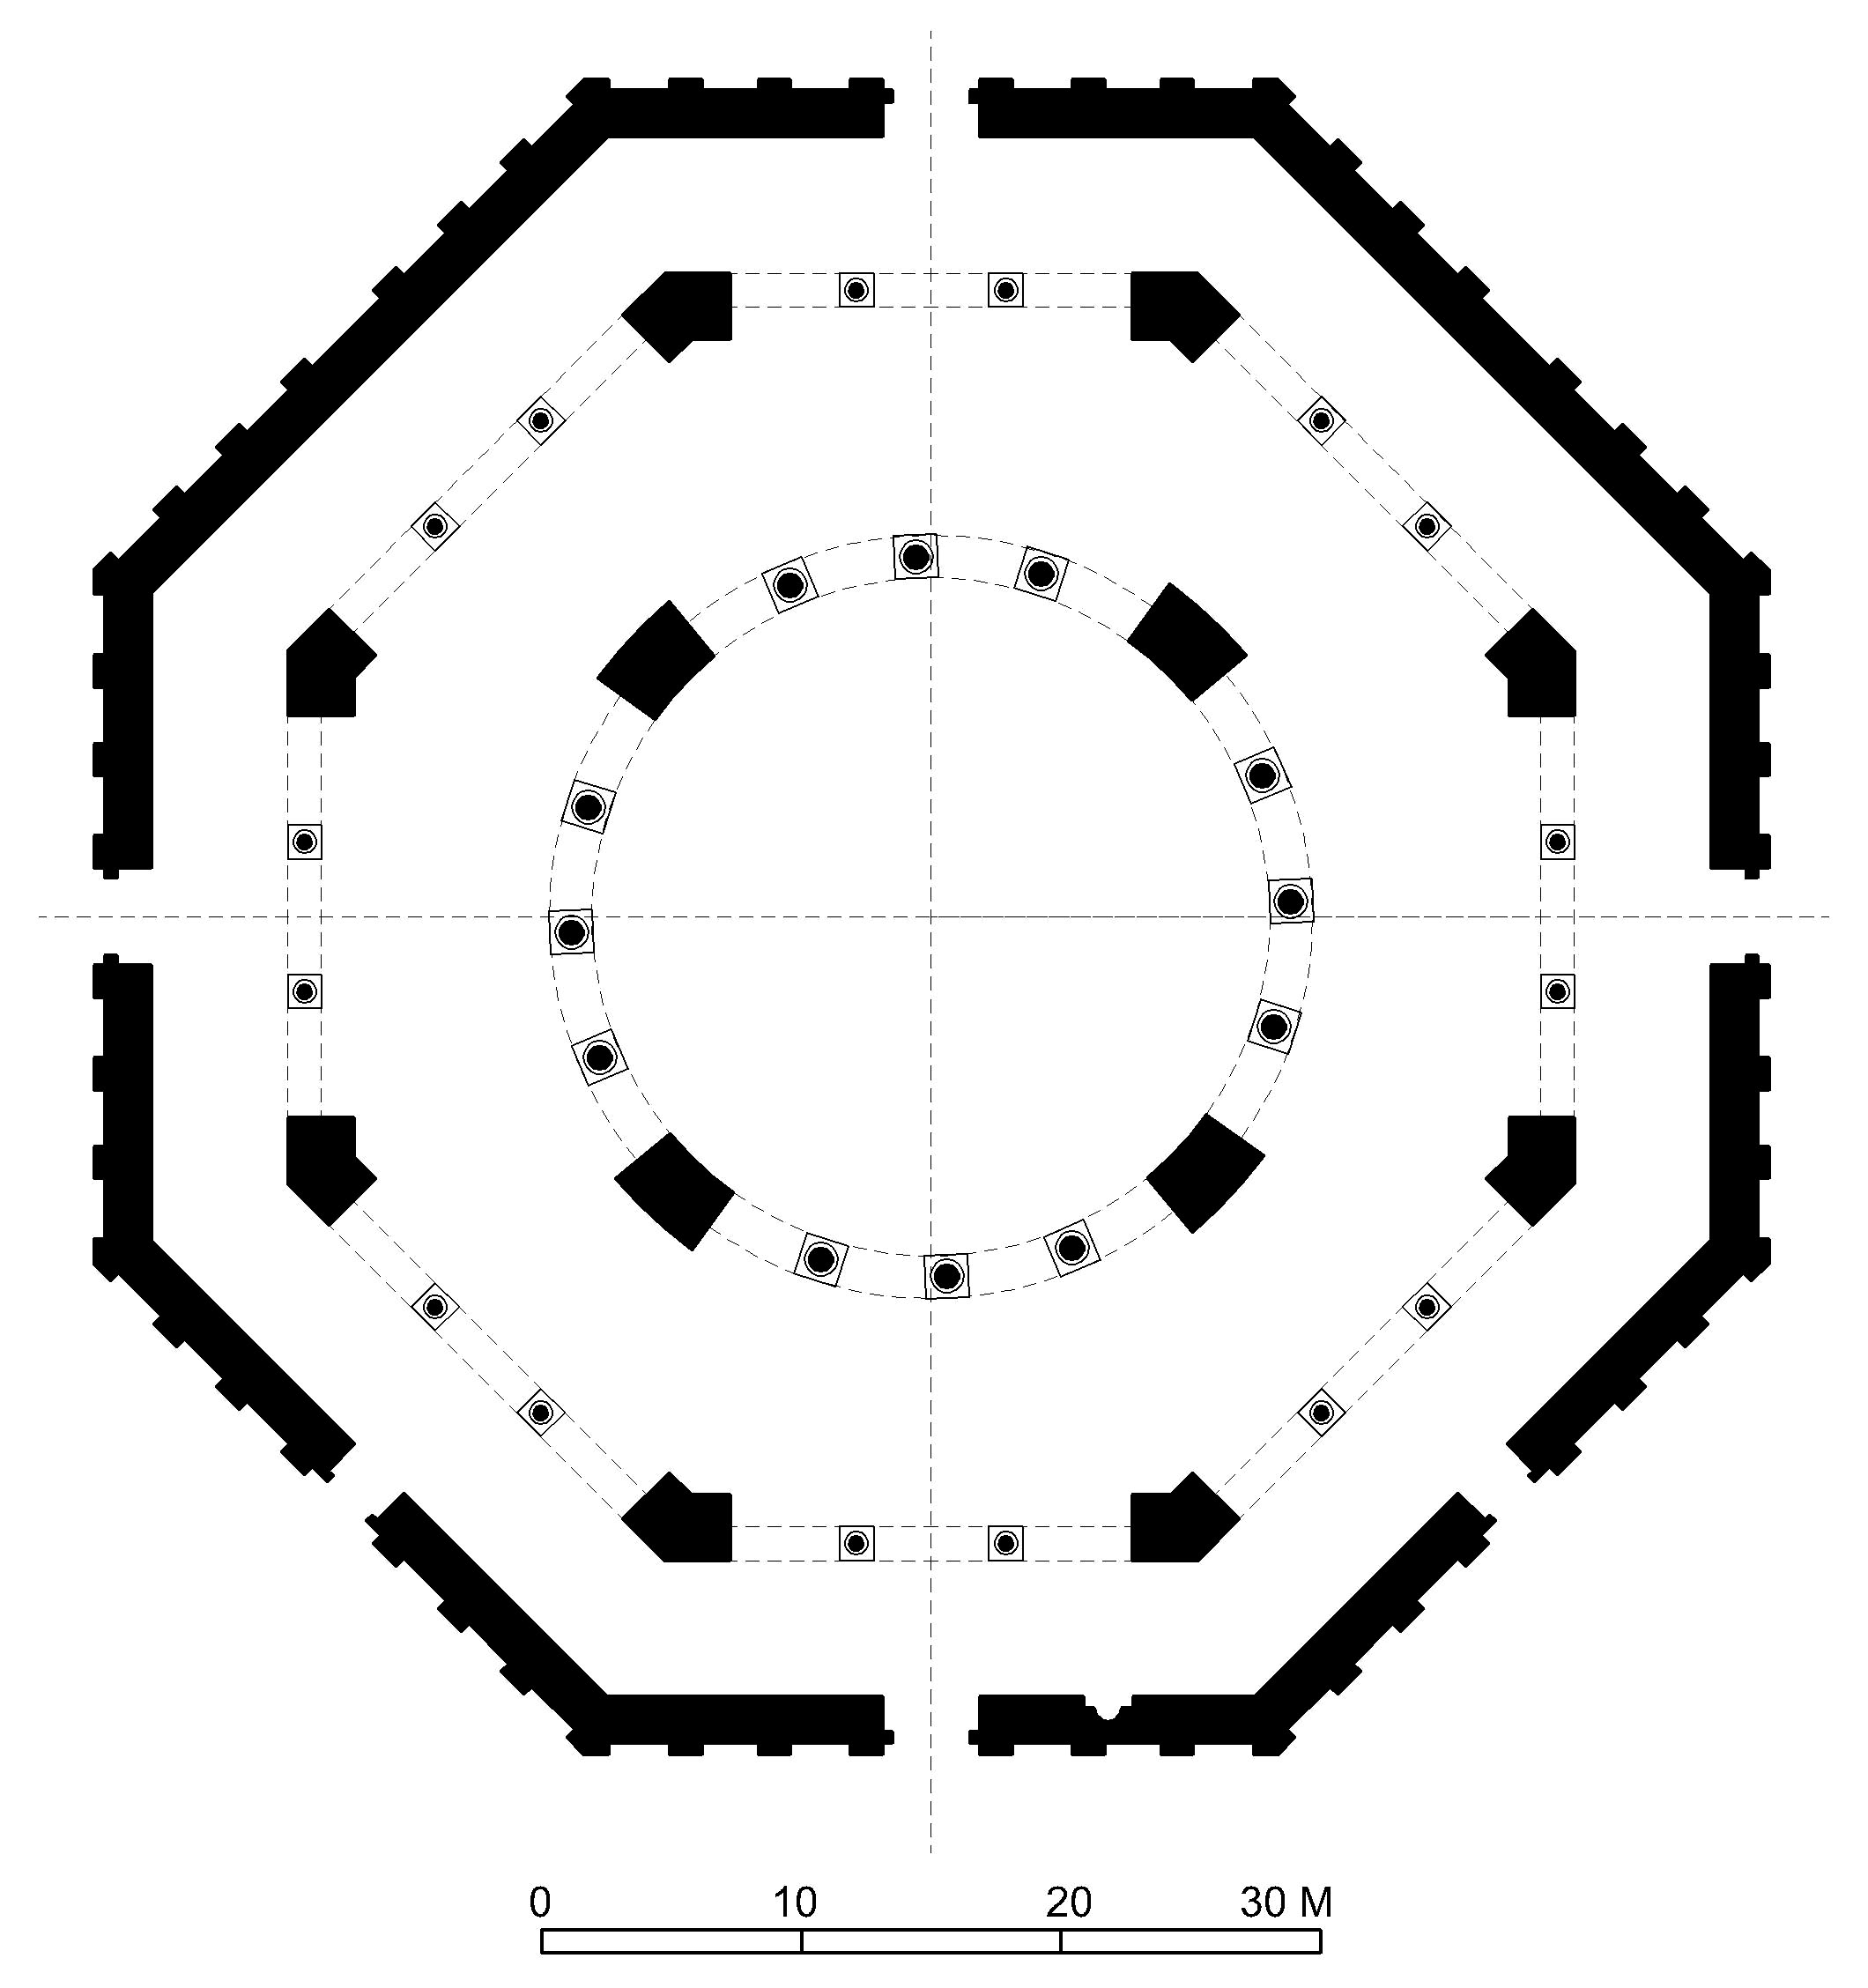 Qubba al-Sakhra - Floor plan of mosque in AutoCAD 2000 format. Click the download button to download a zipped file containing the .dwg file. 